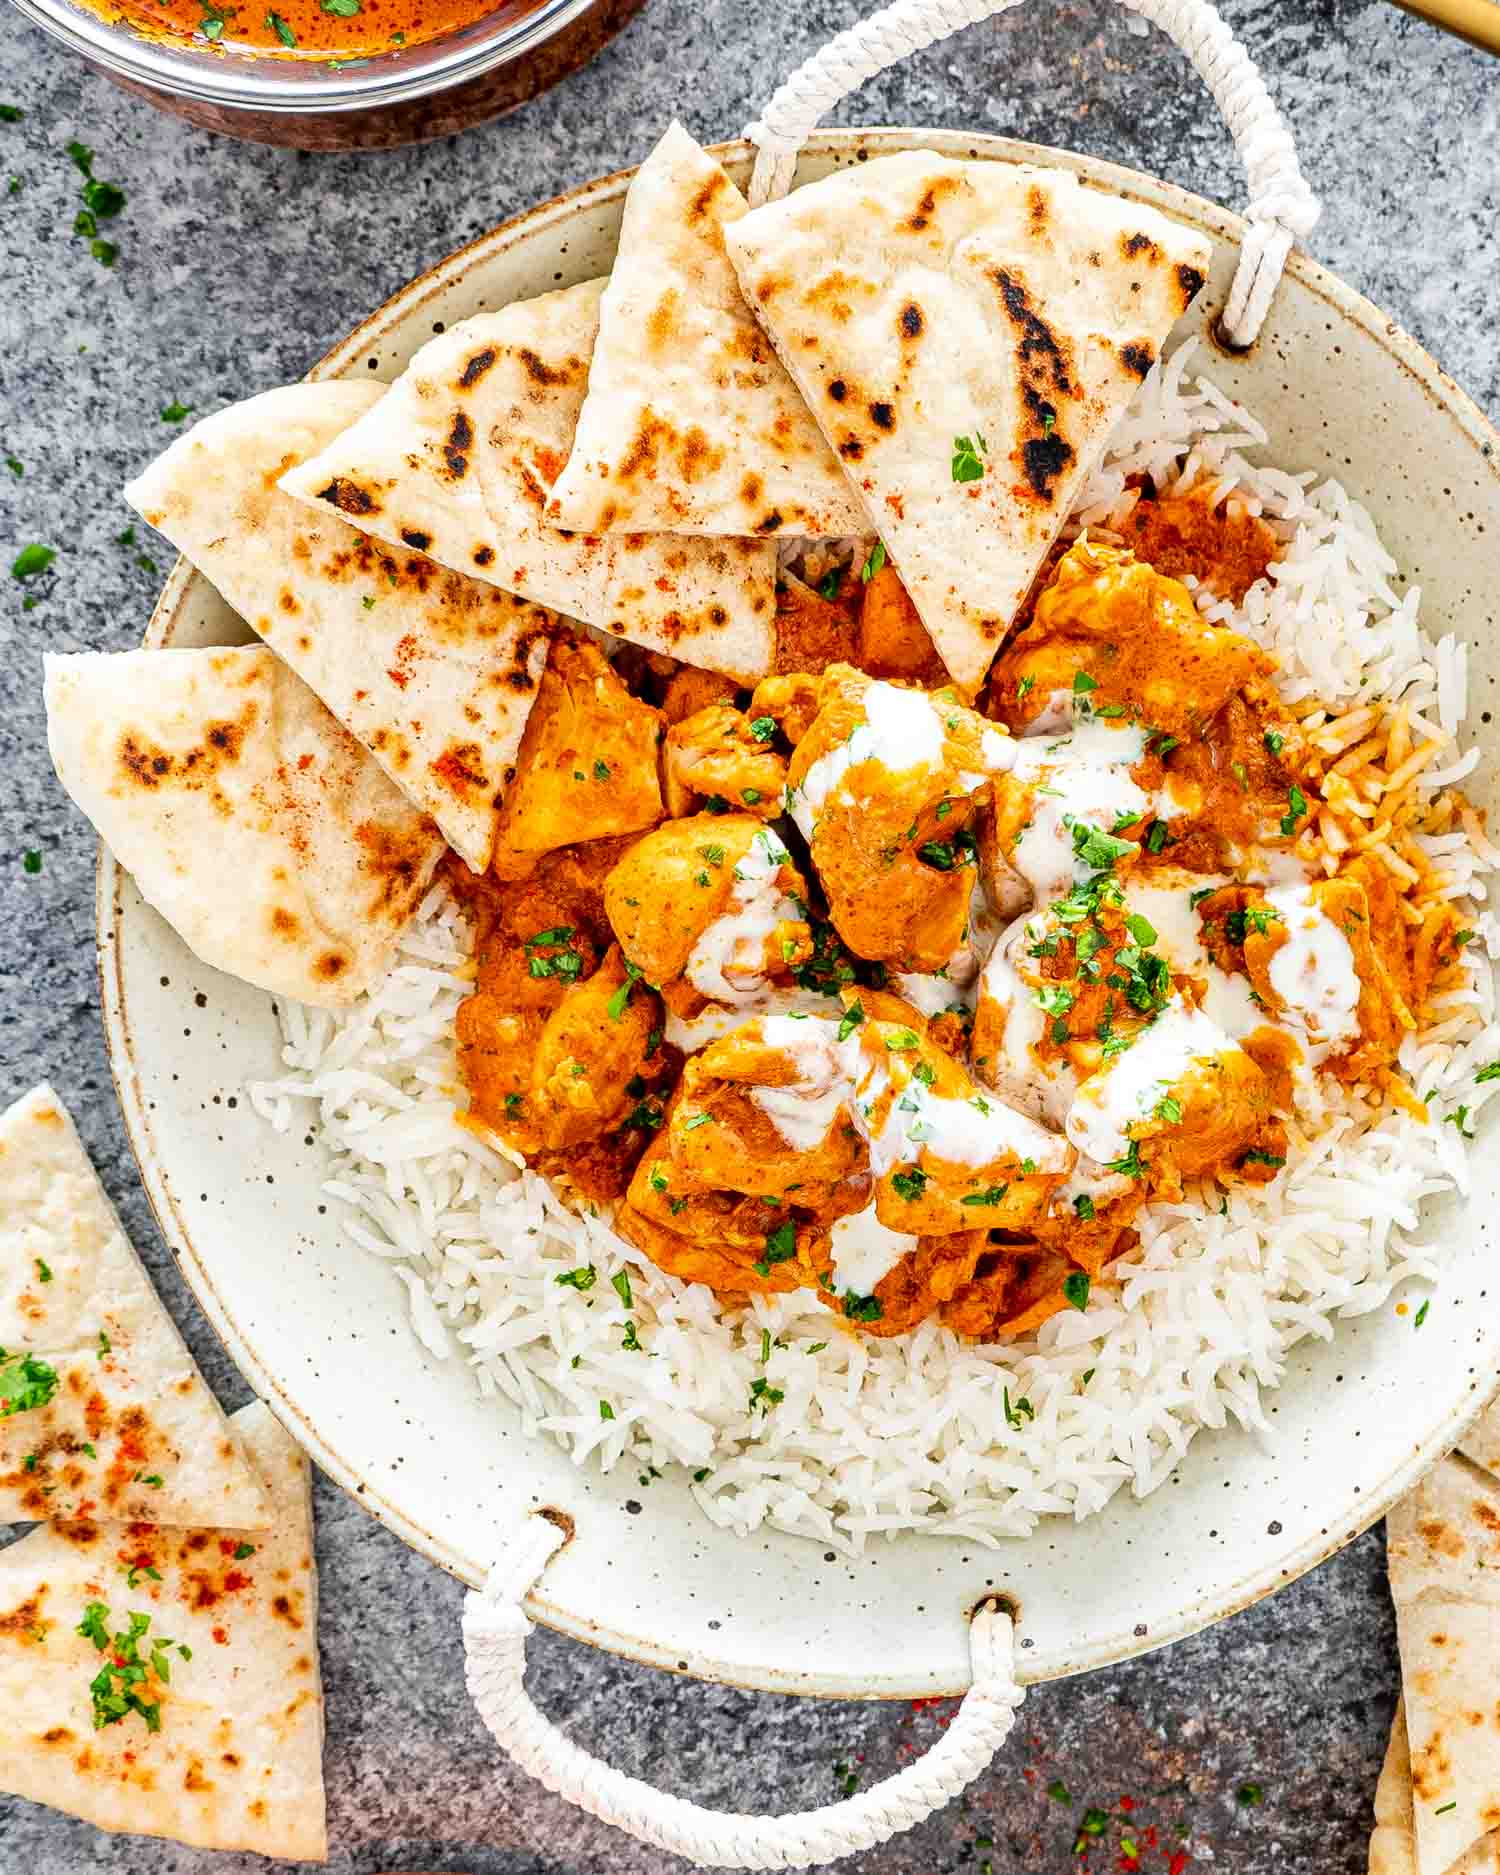 butter chicken over a bed of rice on a plate with naan.